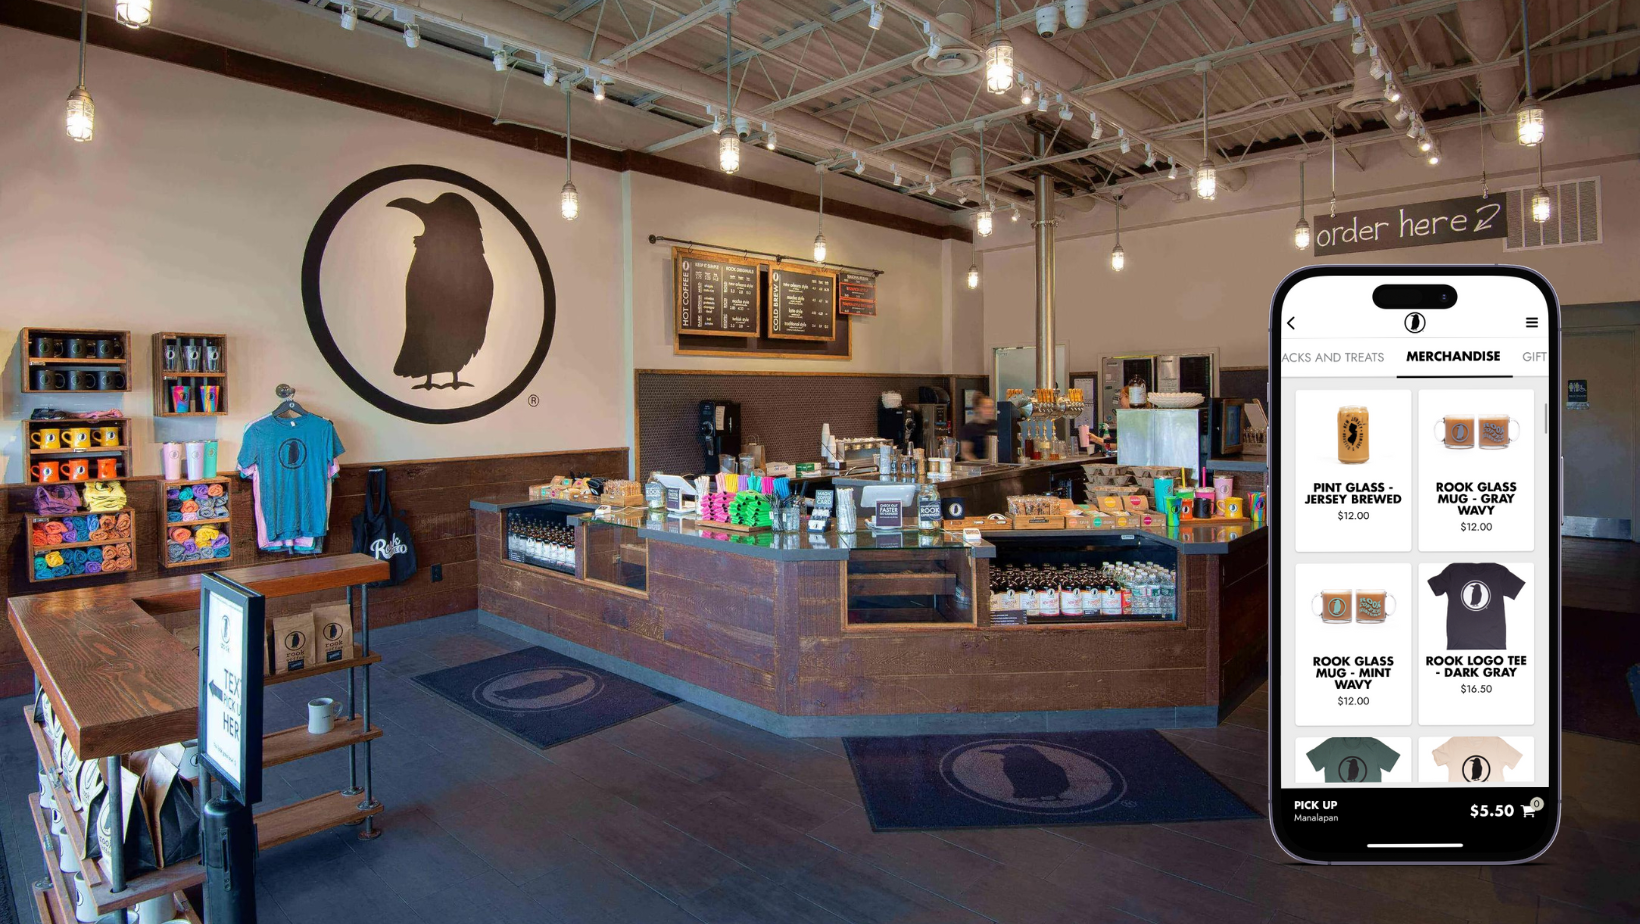 Rook Coffee Shop interior and custom-branded mobile app.